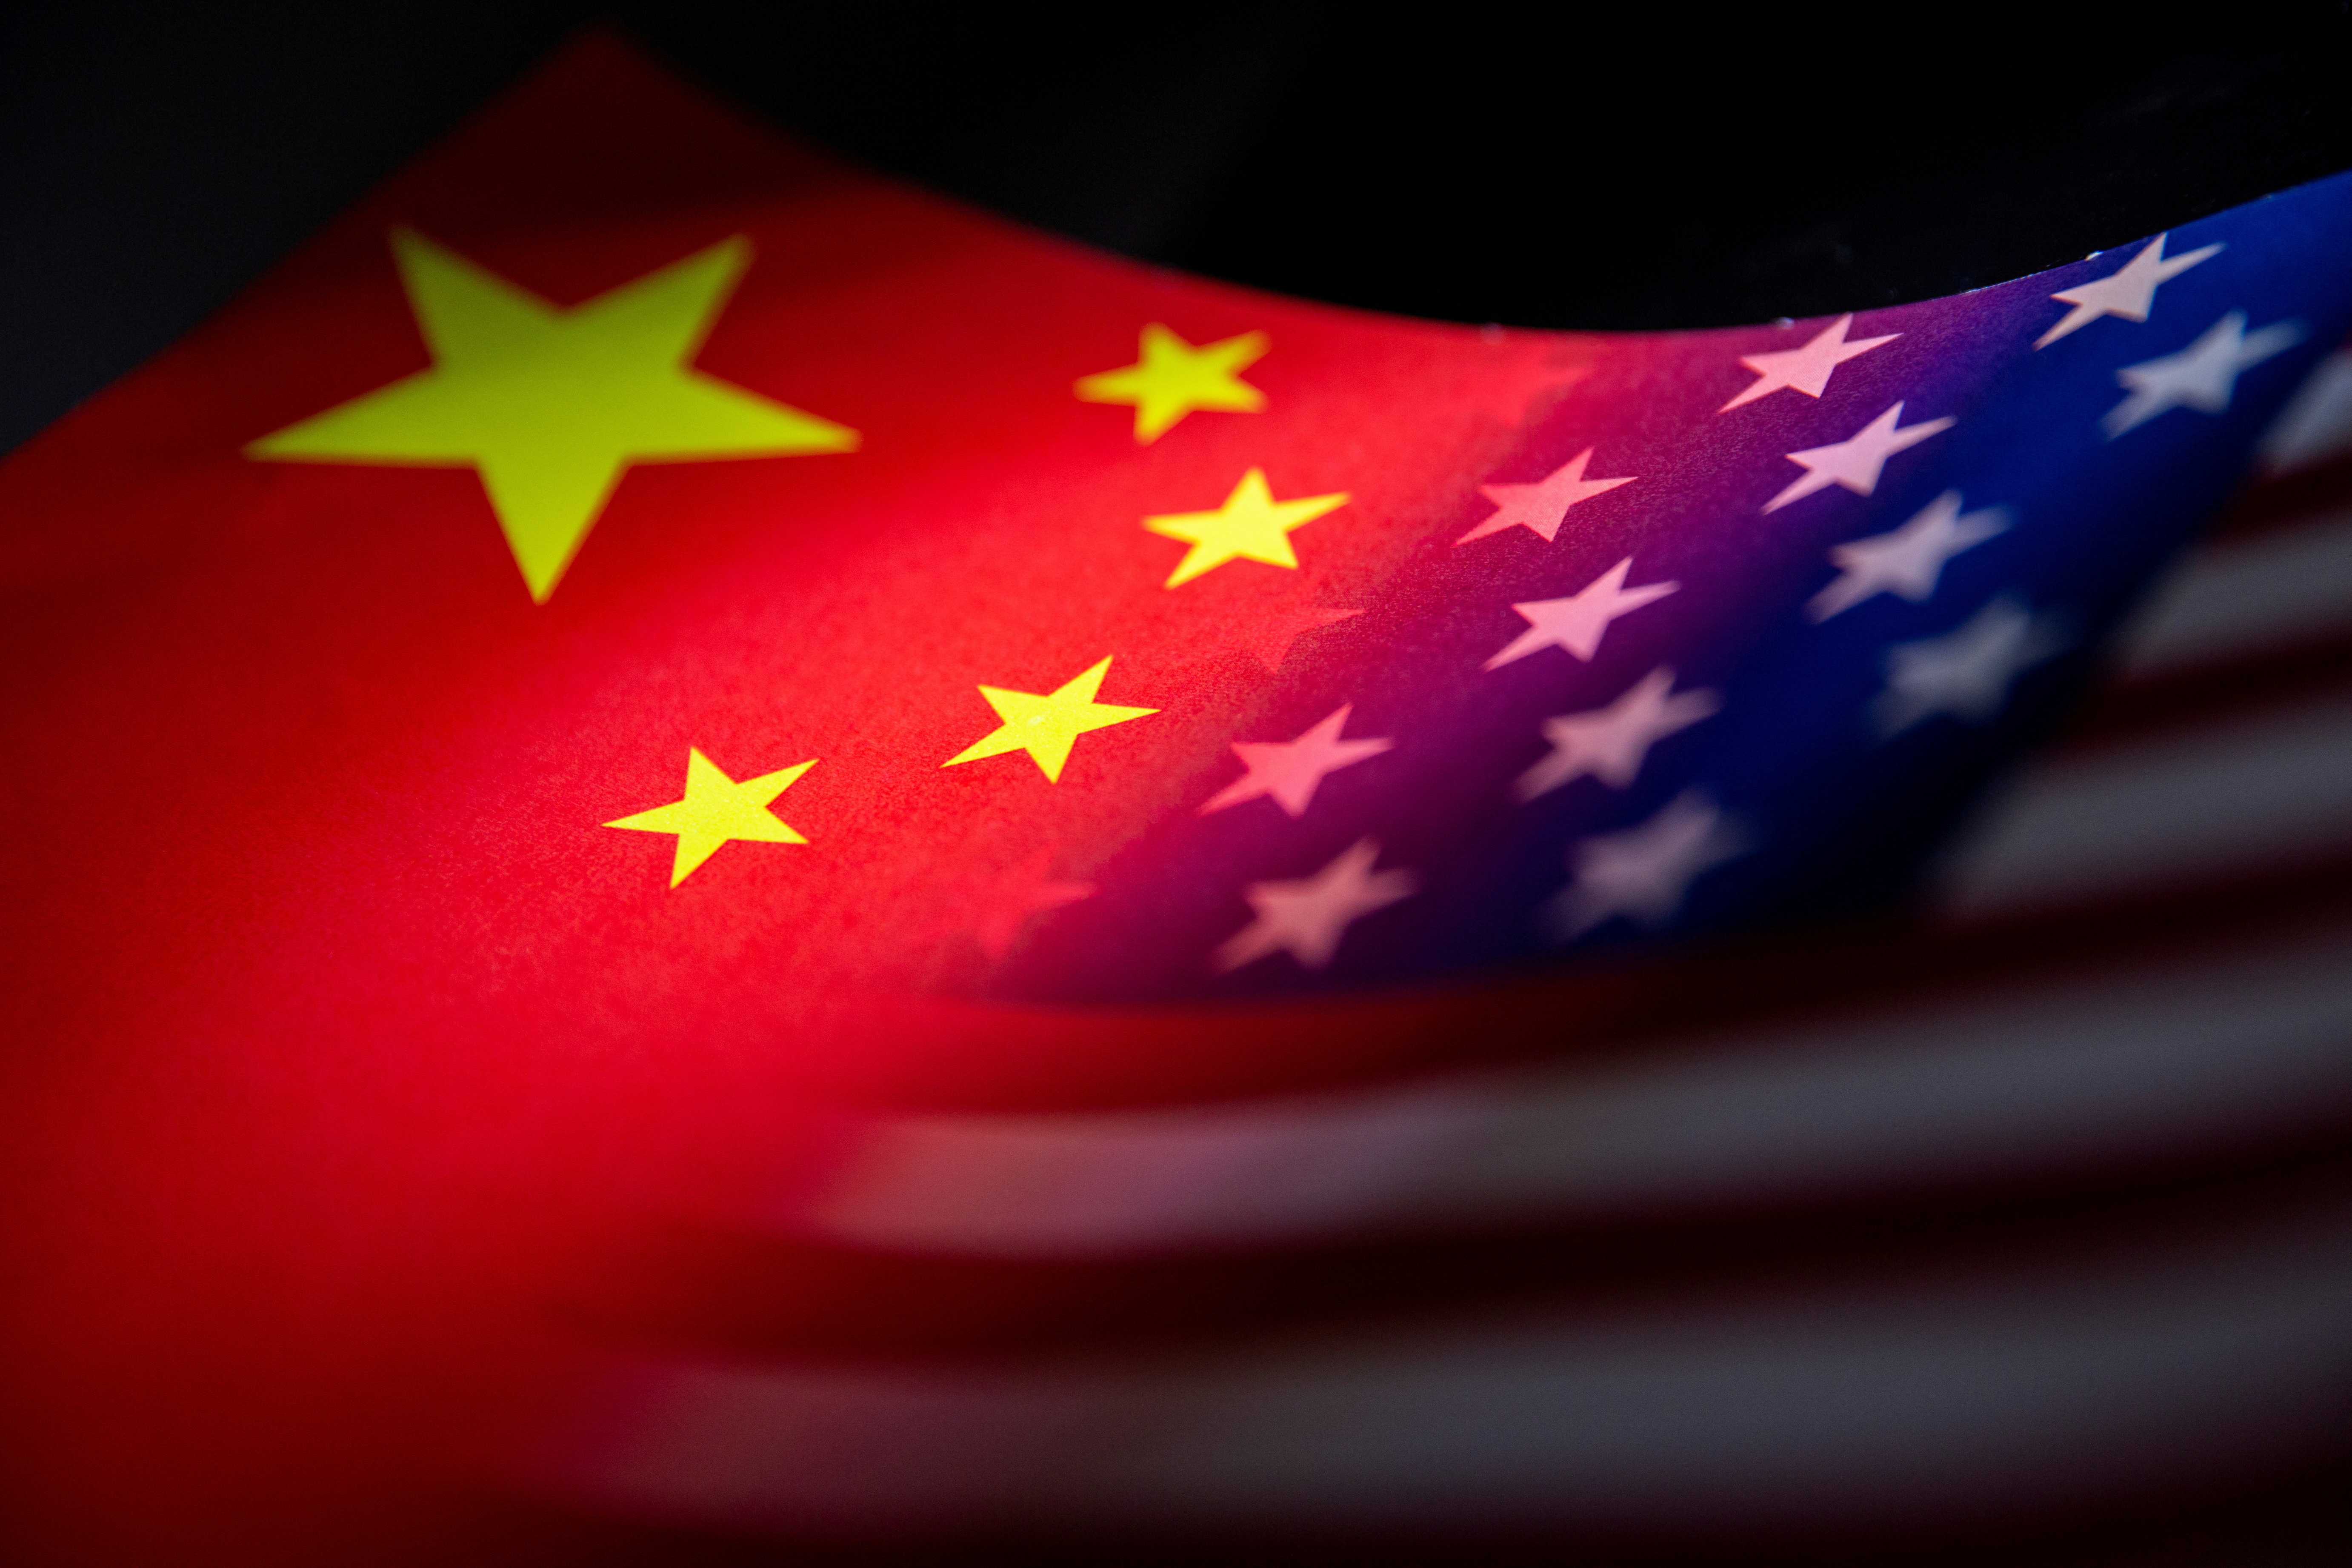 Illustration shows China and U.S. flags